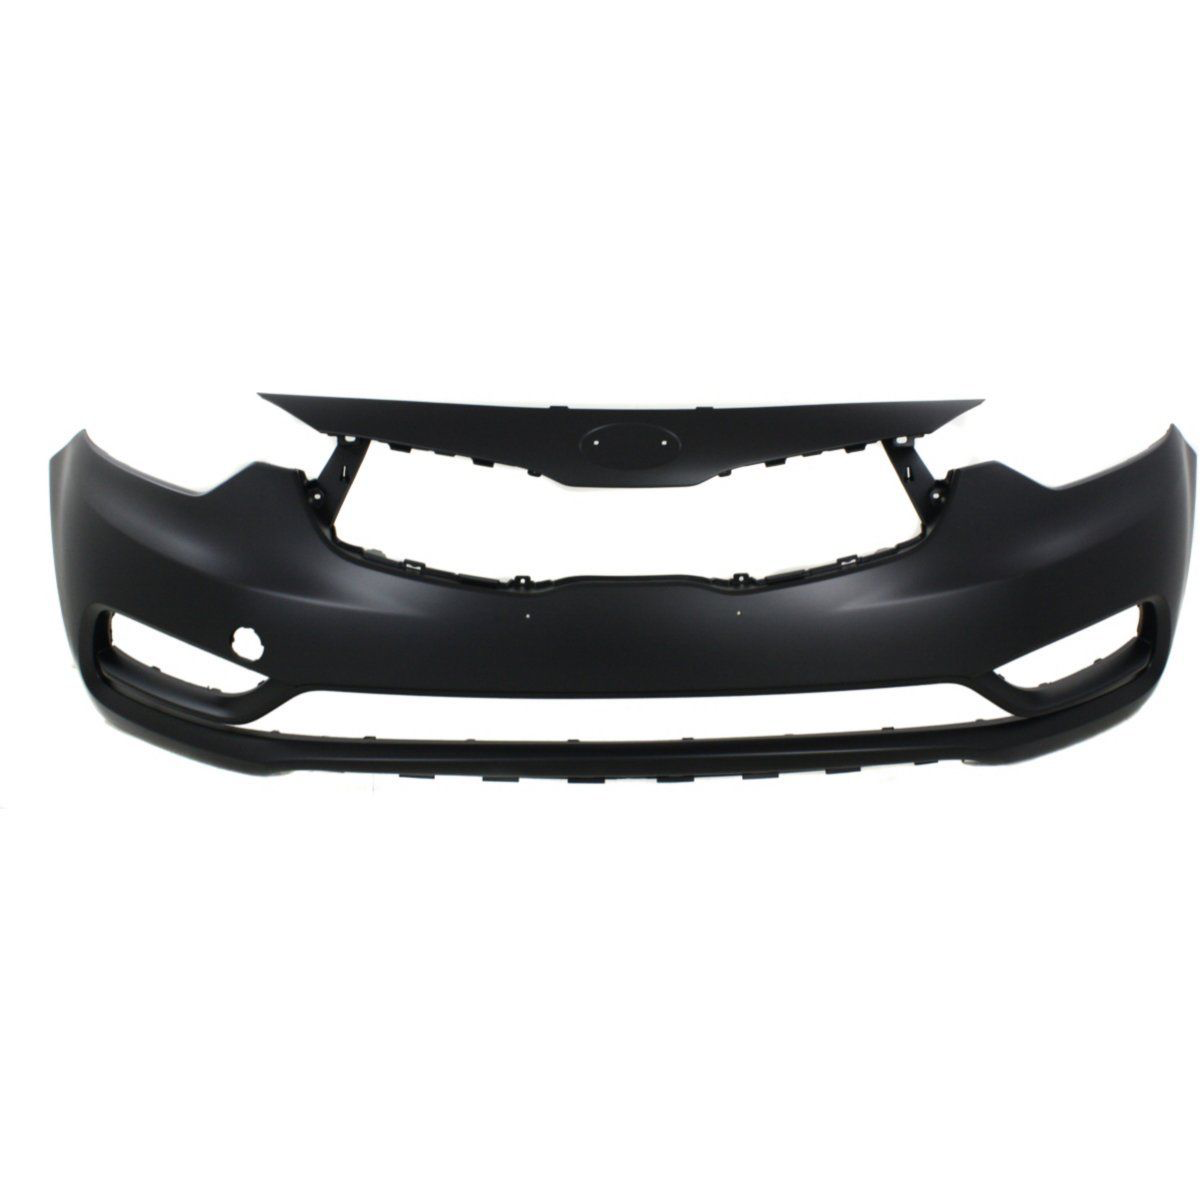 2014-2016 KIA FORTE Front Bumper Cover Sedan Painted to Match